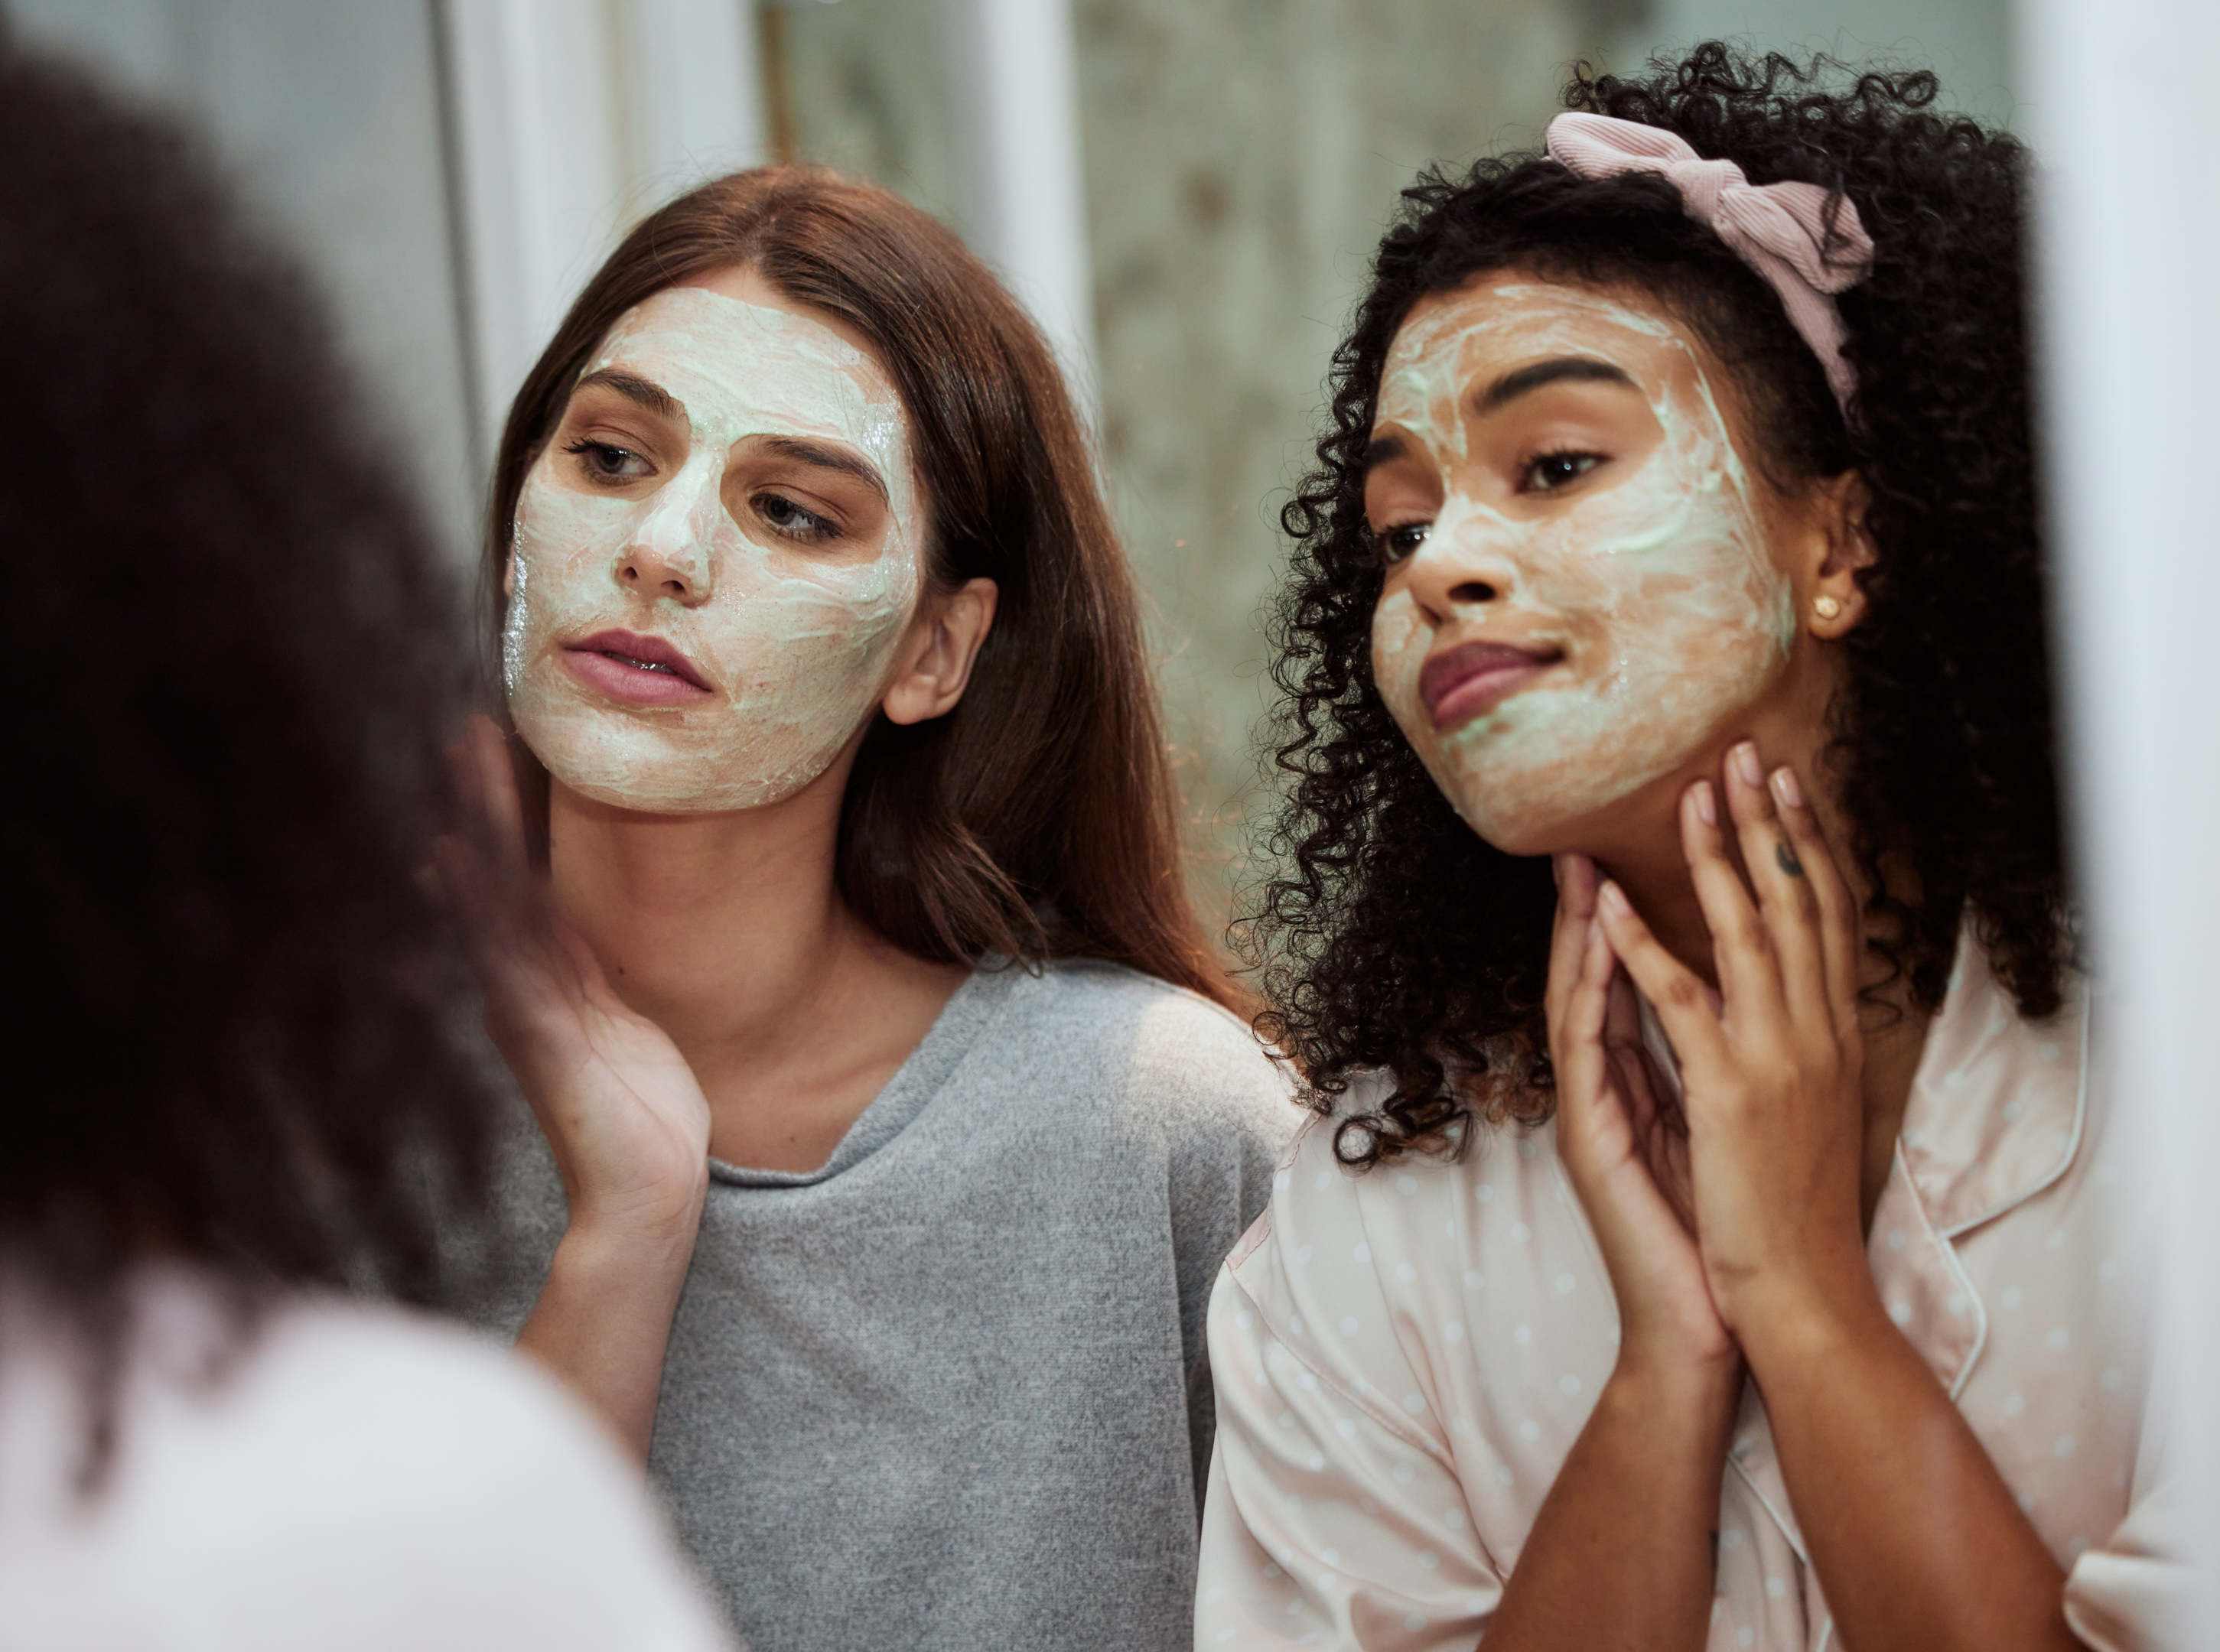 The right care products for combination skin (https://elements.envato.com/women-home-skincare-or-face-mask-bonding-in-house--9KD7HCH)